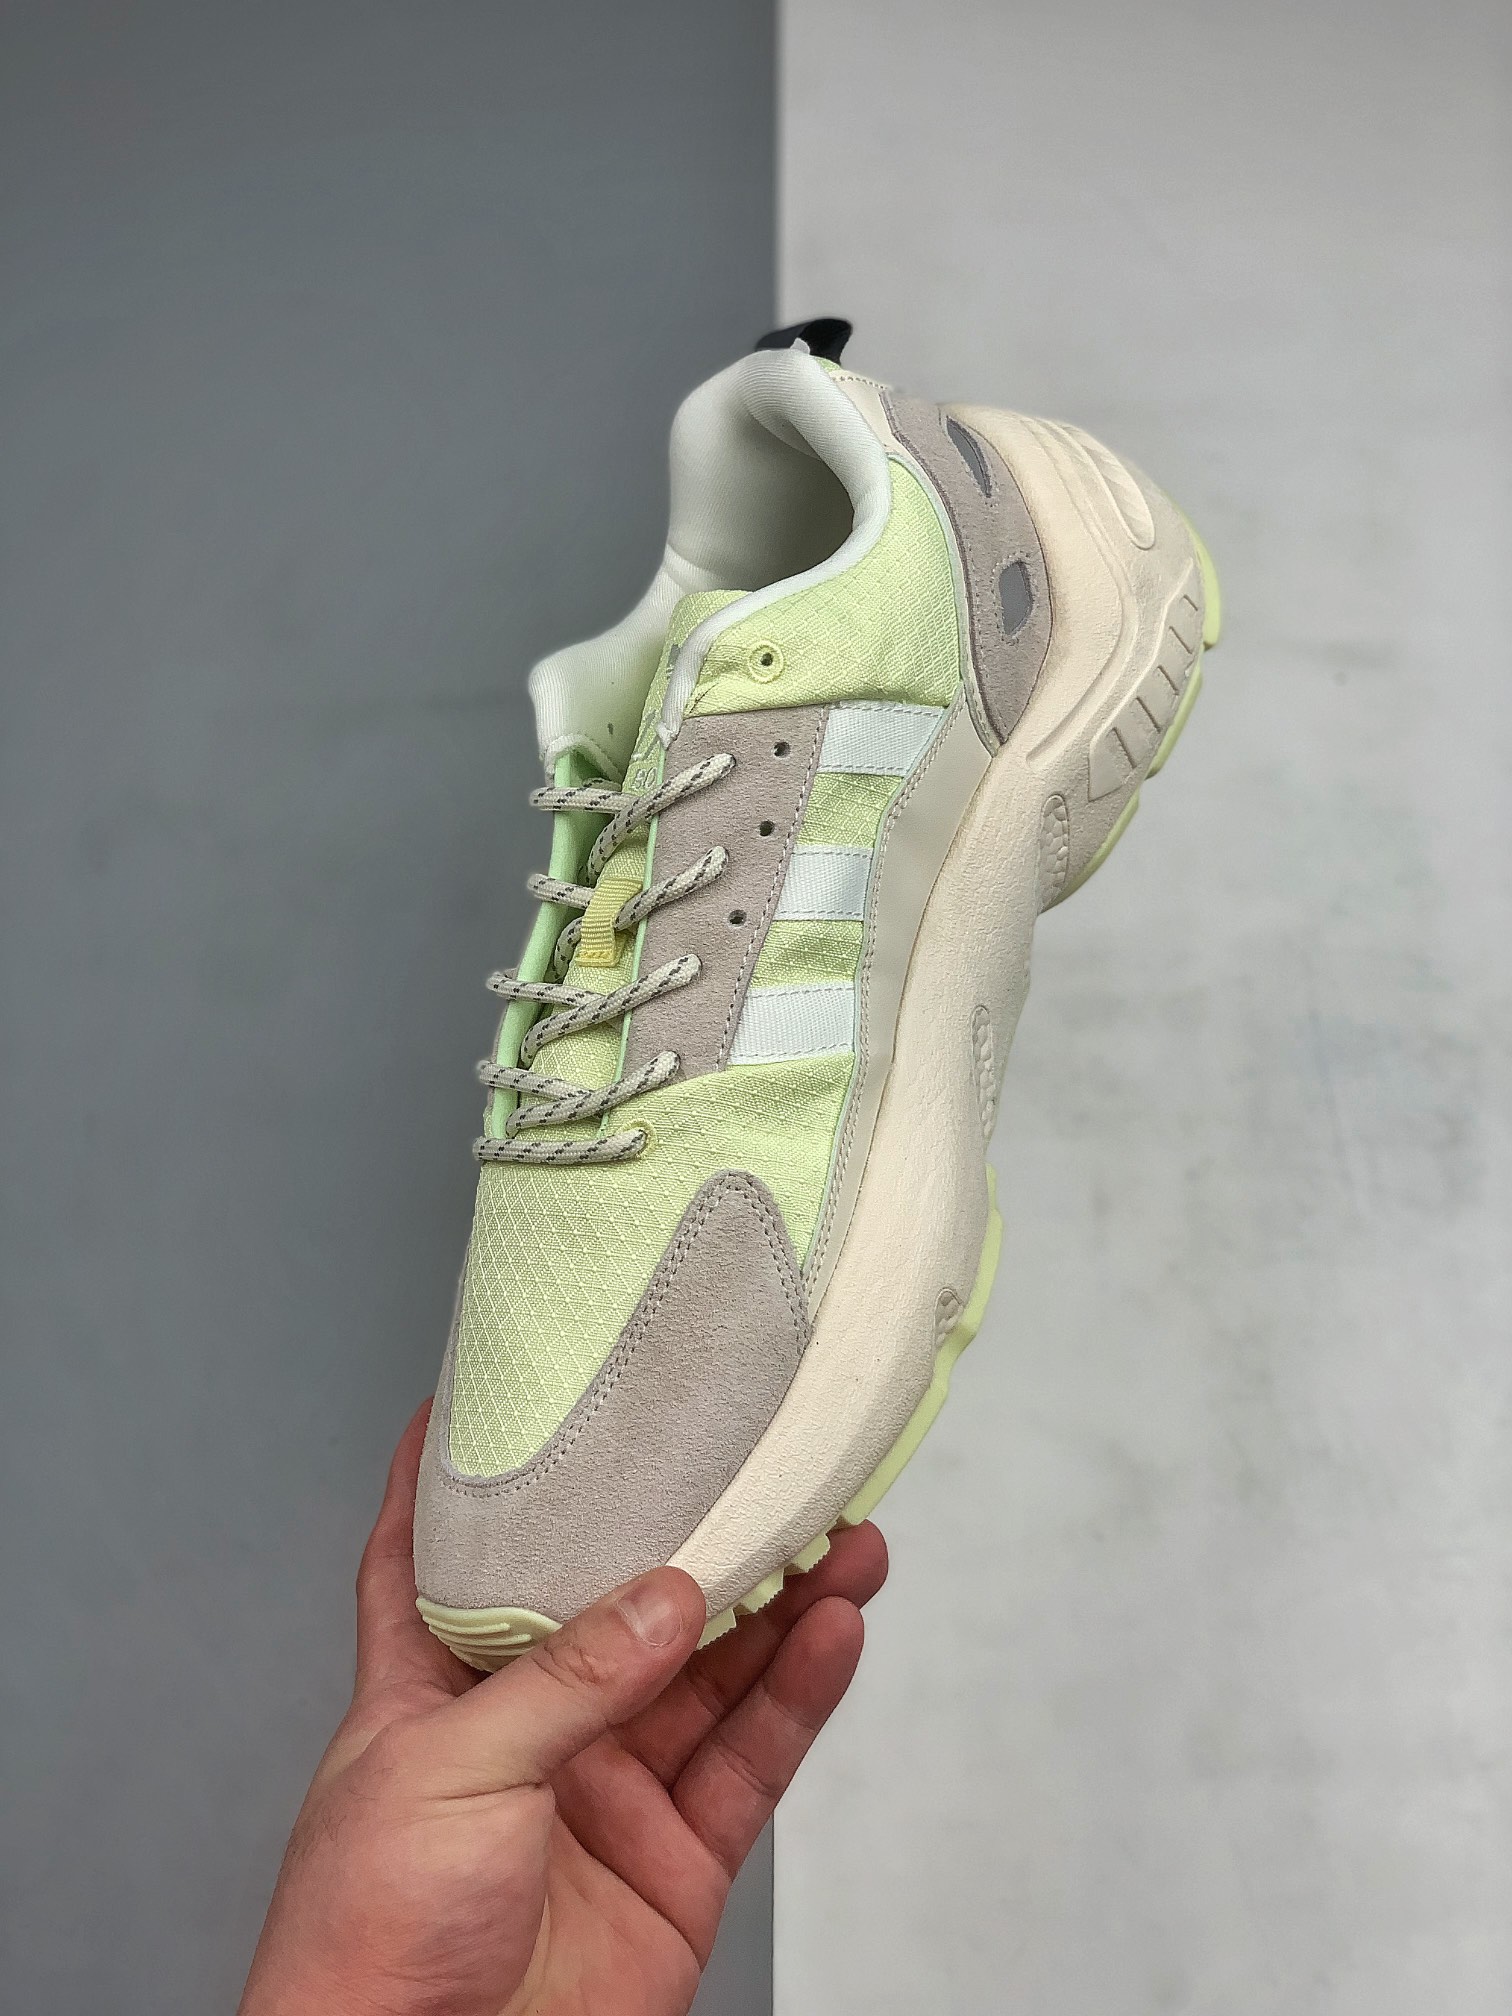 Adidas ZX 22 Boost Sand Yellow Tint GY5271 - Stylish and Comfortable Footwear